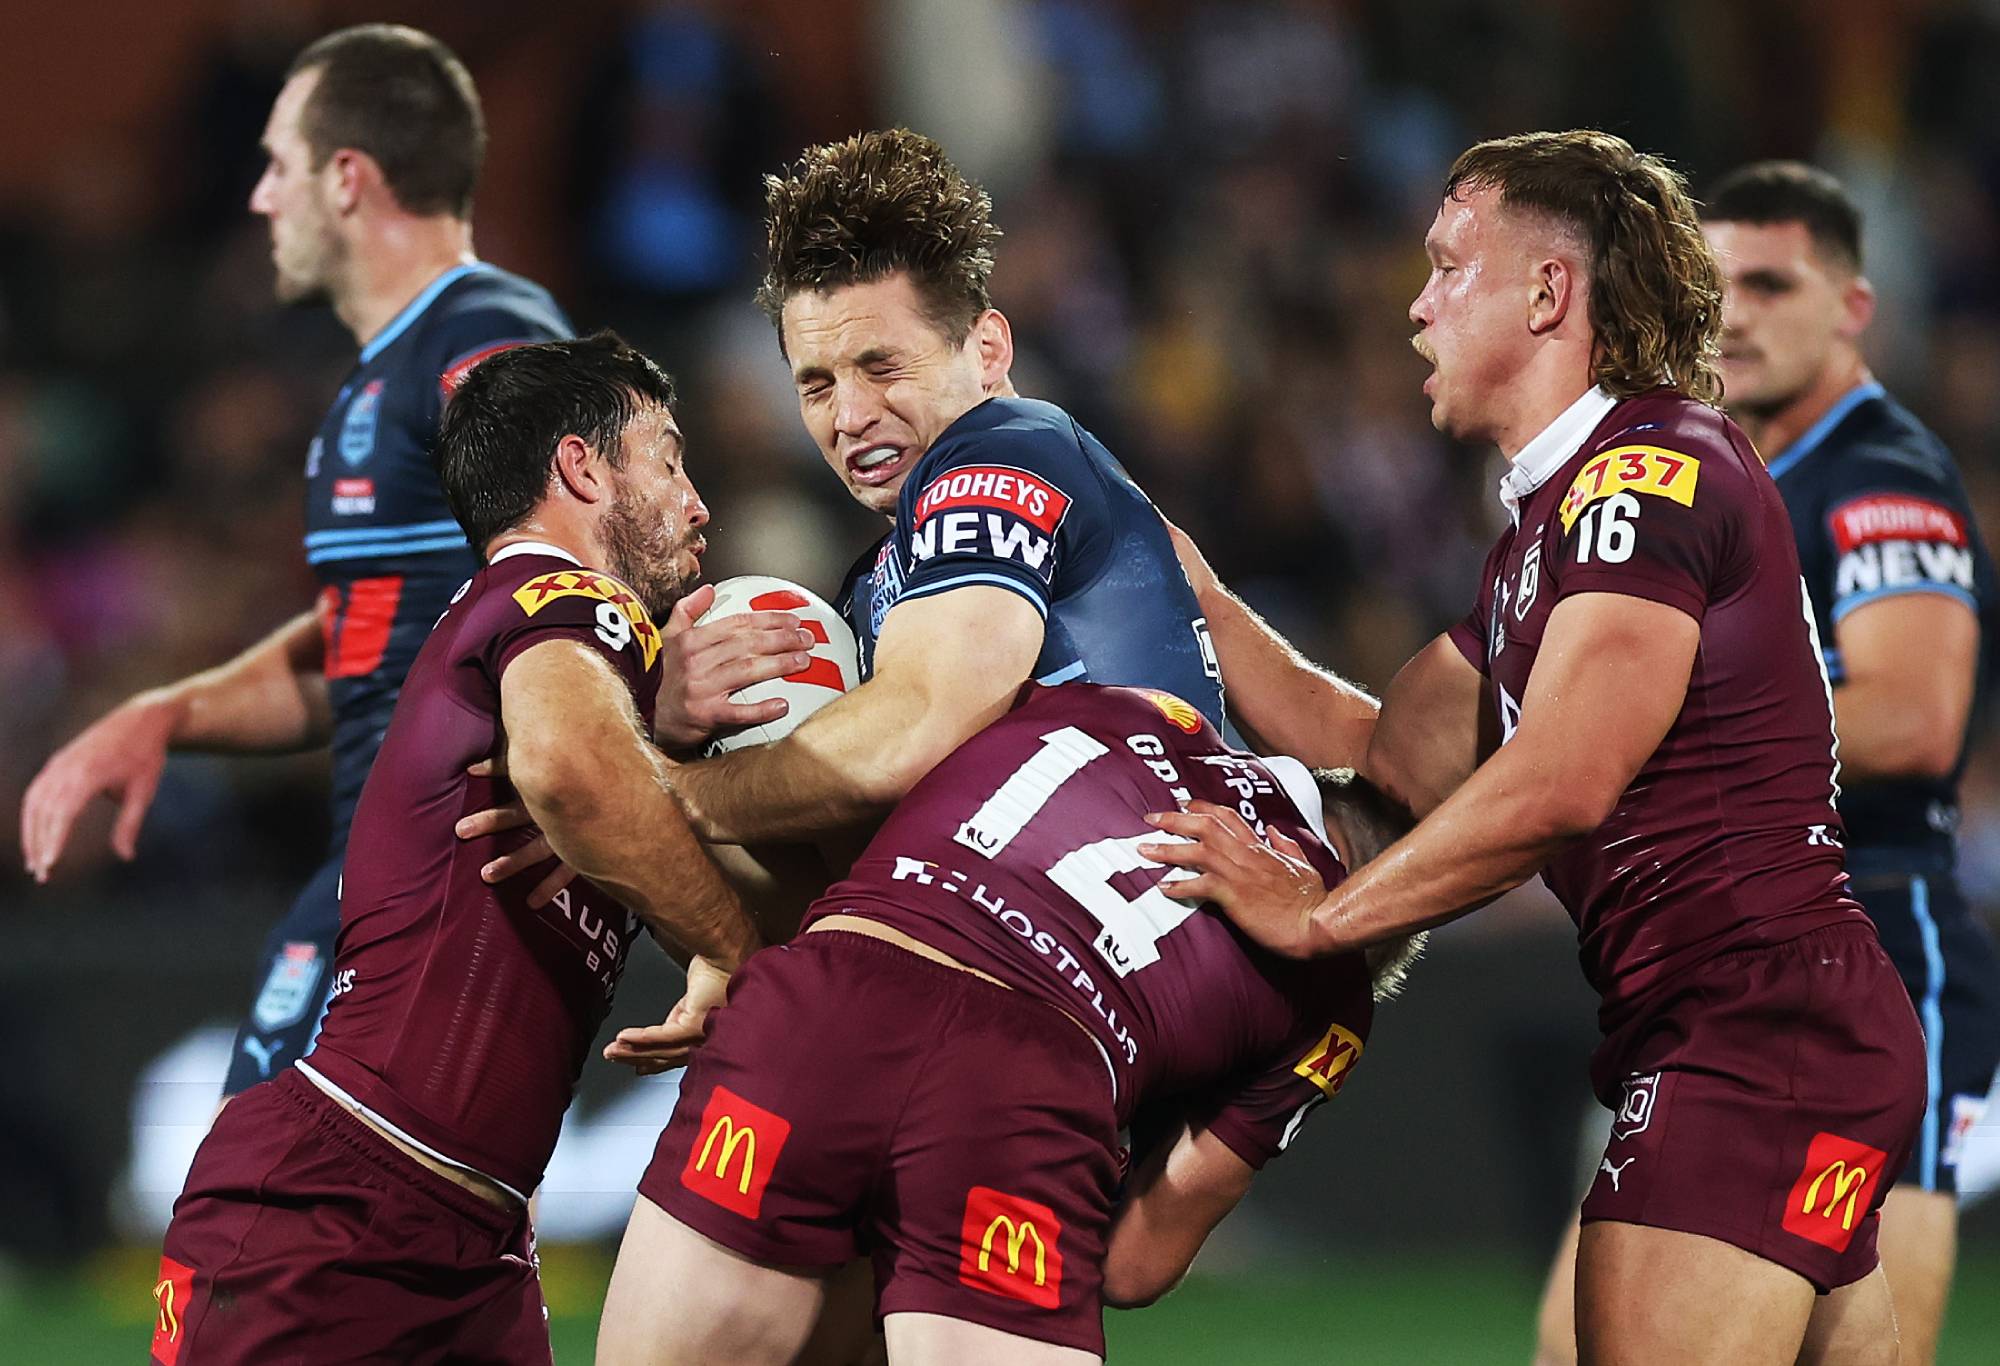 Cameron Murray of the Blues is tackled by Harry Grant and Ben Hunt of the Maroons during game one of the 2023 State of Origin series between the Queensland Maroons and New South Wales Blues at Adelaide Oval on May 31, 2023 in Adelaide, Australia. (Photo by Mark Kolbe/Getty Image